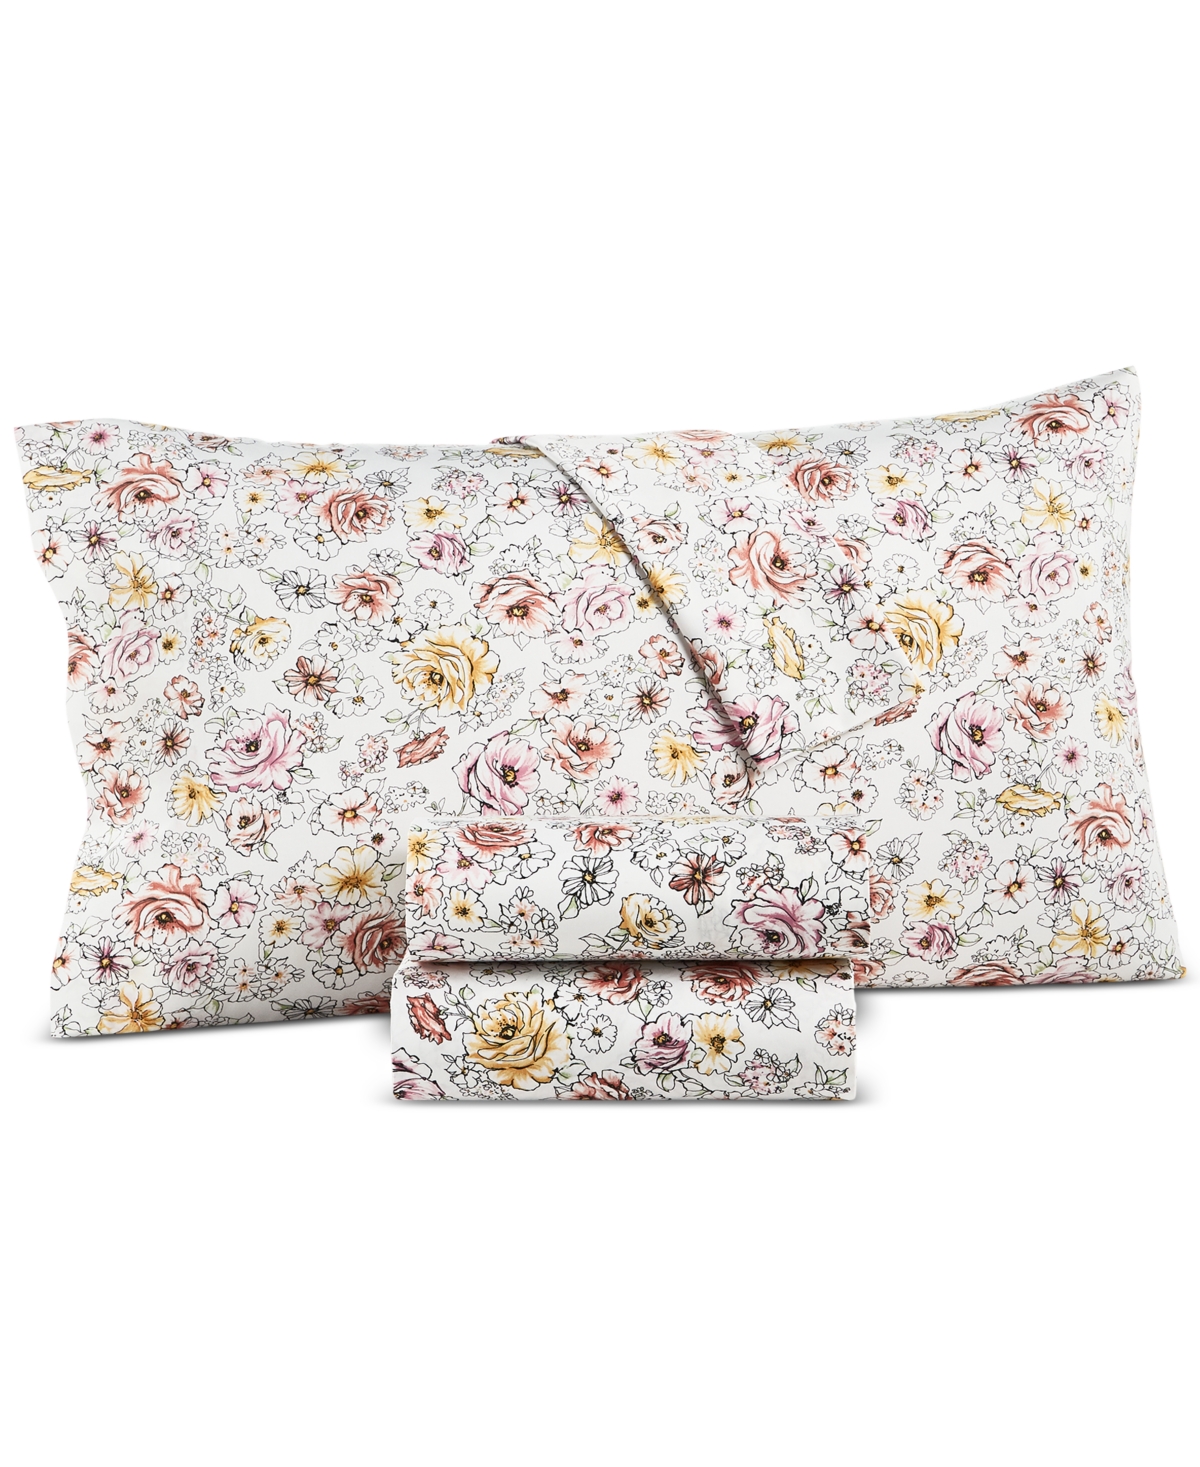 Charter Club Damask Designs 550 Thread Count Printed Cotton 4-pc. Sheet Set, California King, Created For Macy's In Outlined Floral Poppy